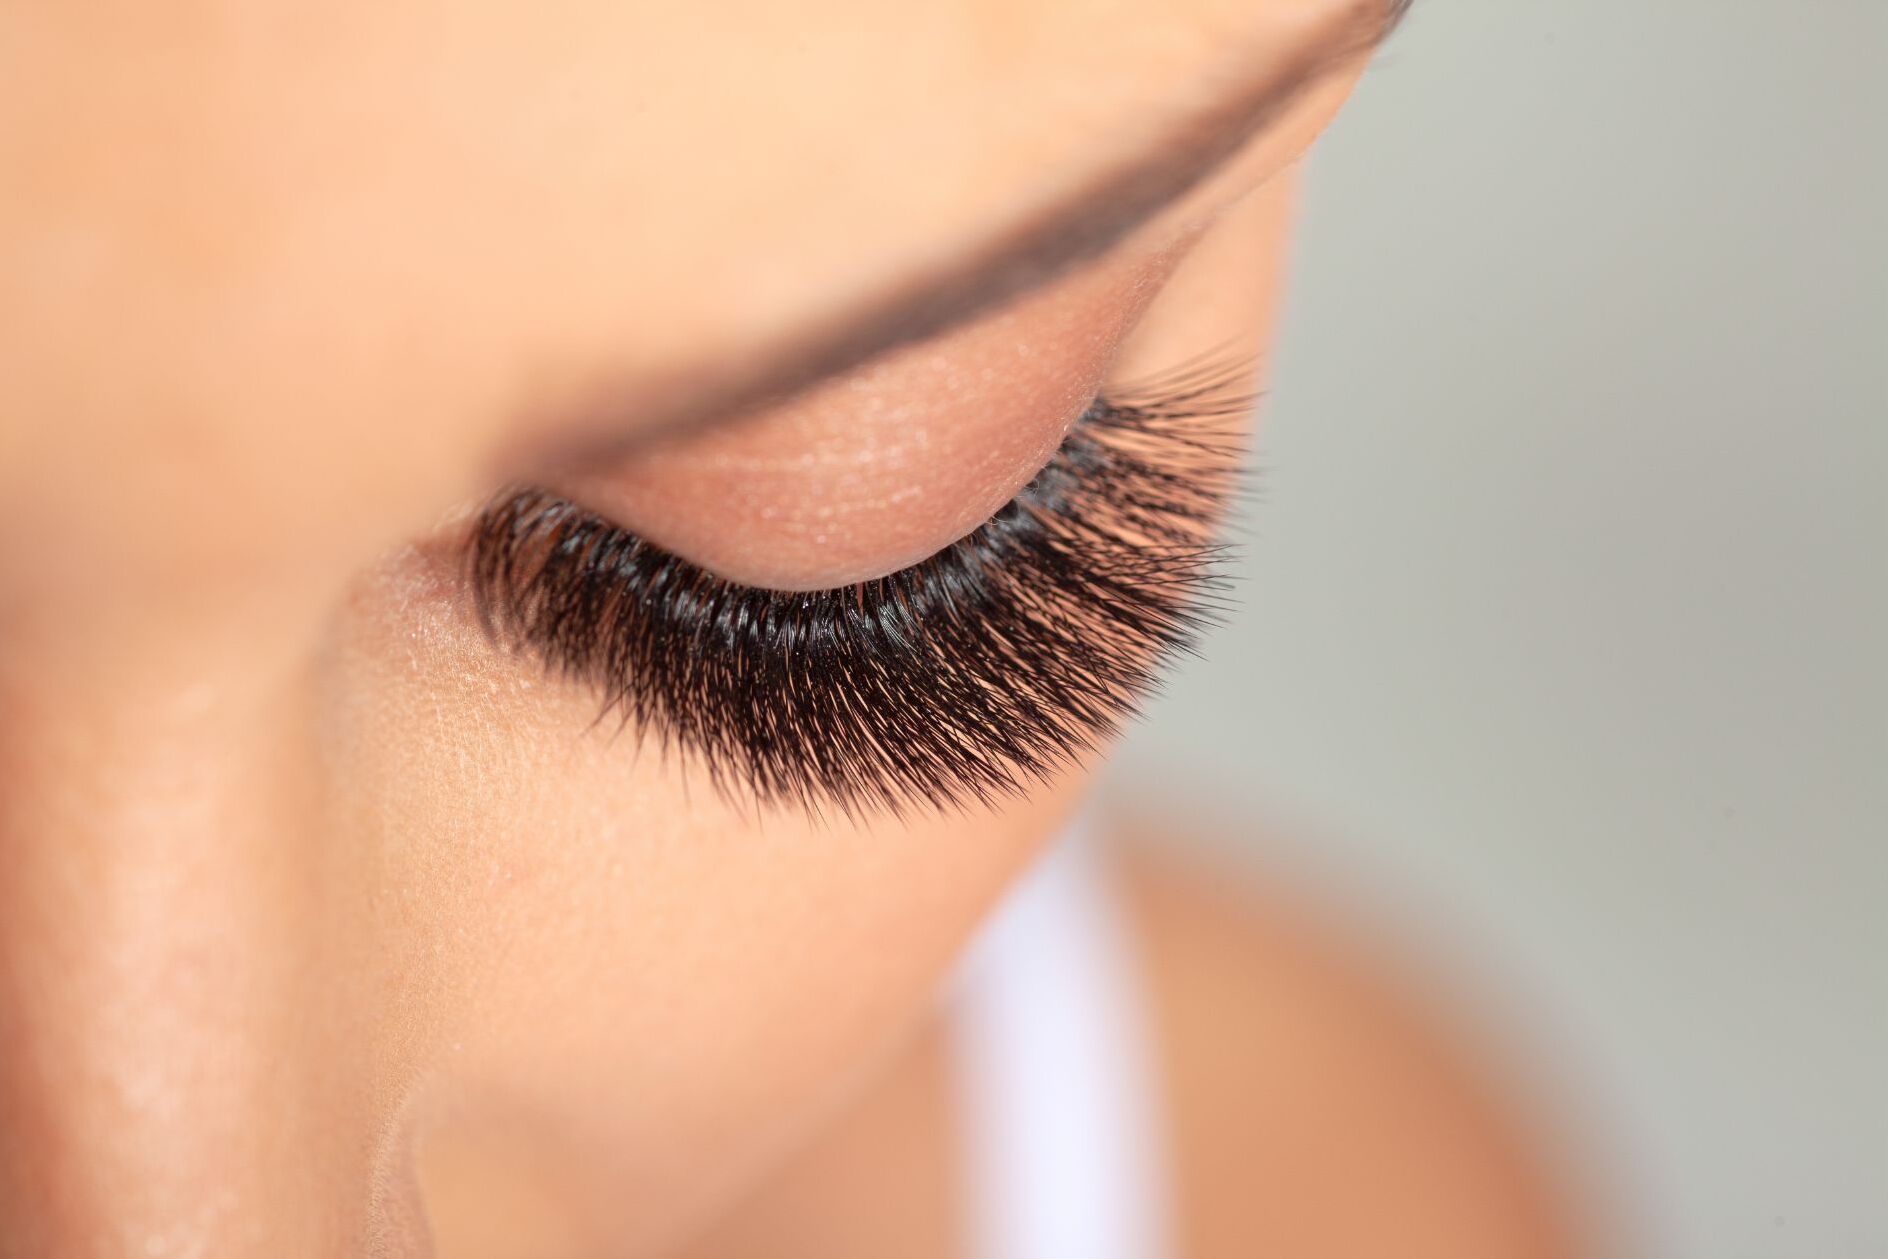 Can Vaseline Remove Lash Extensions At Home?